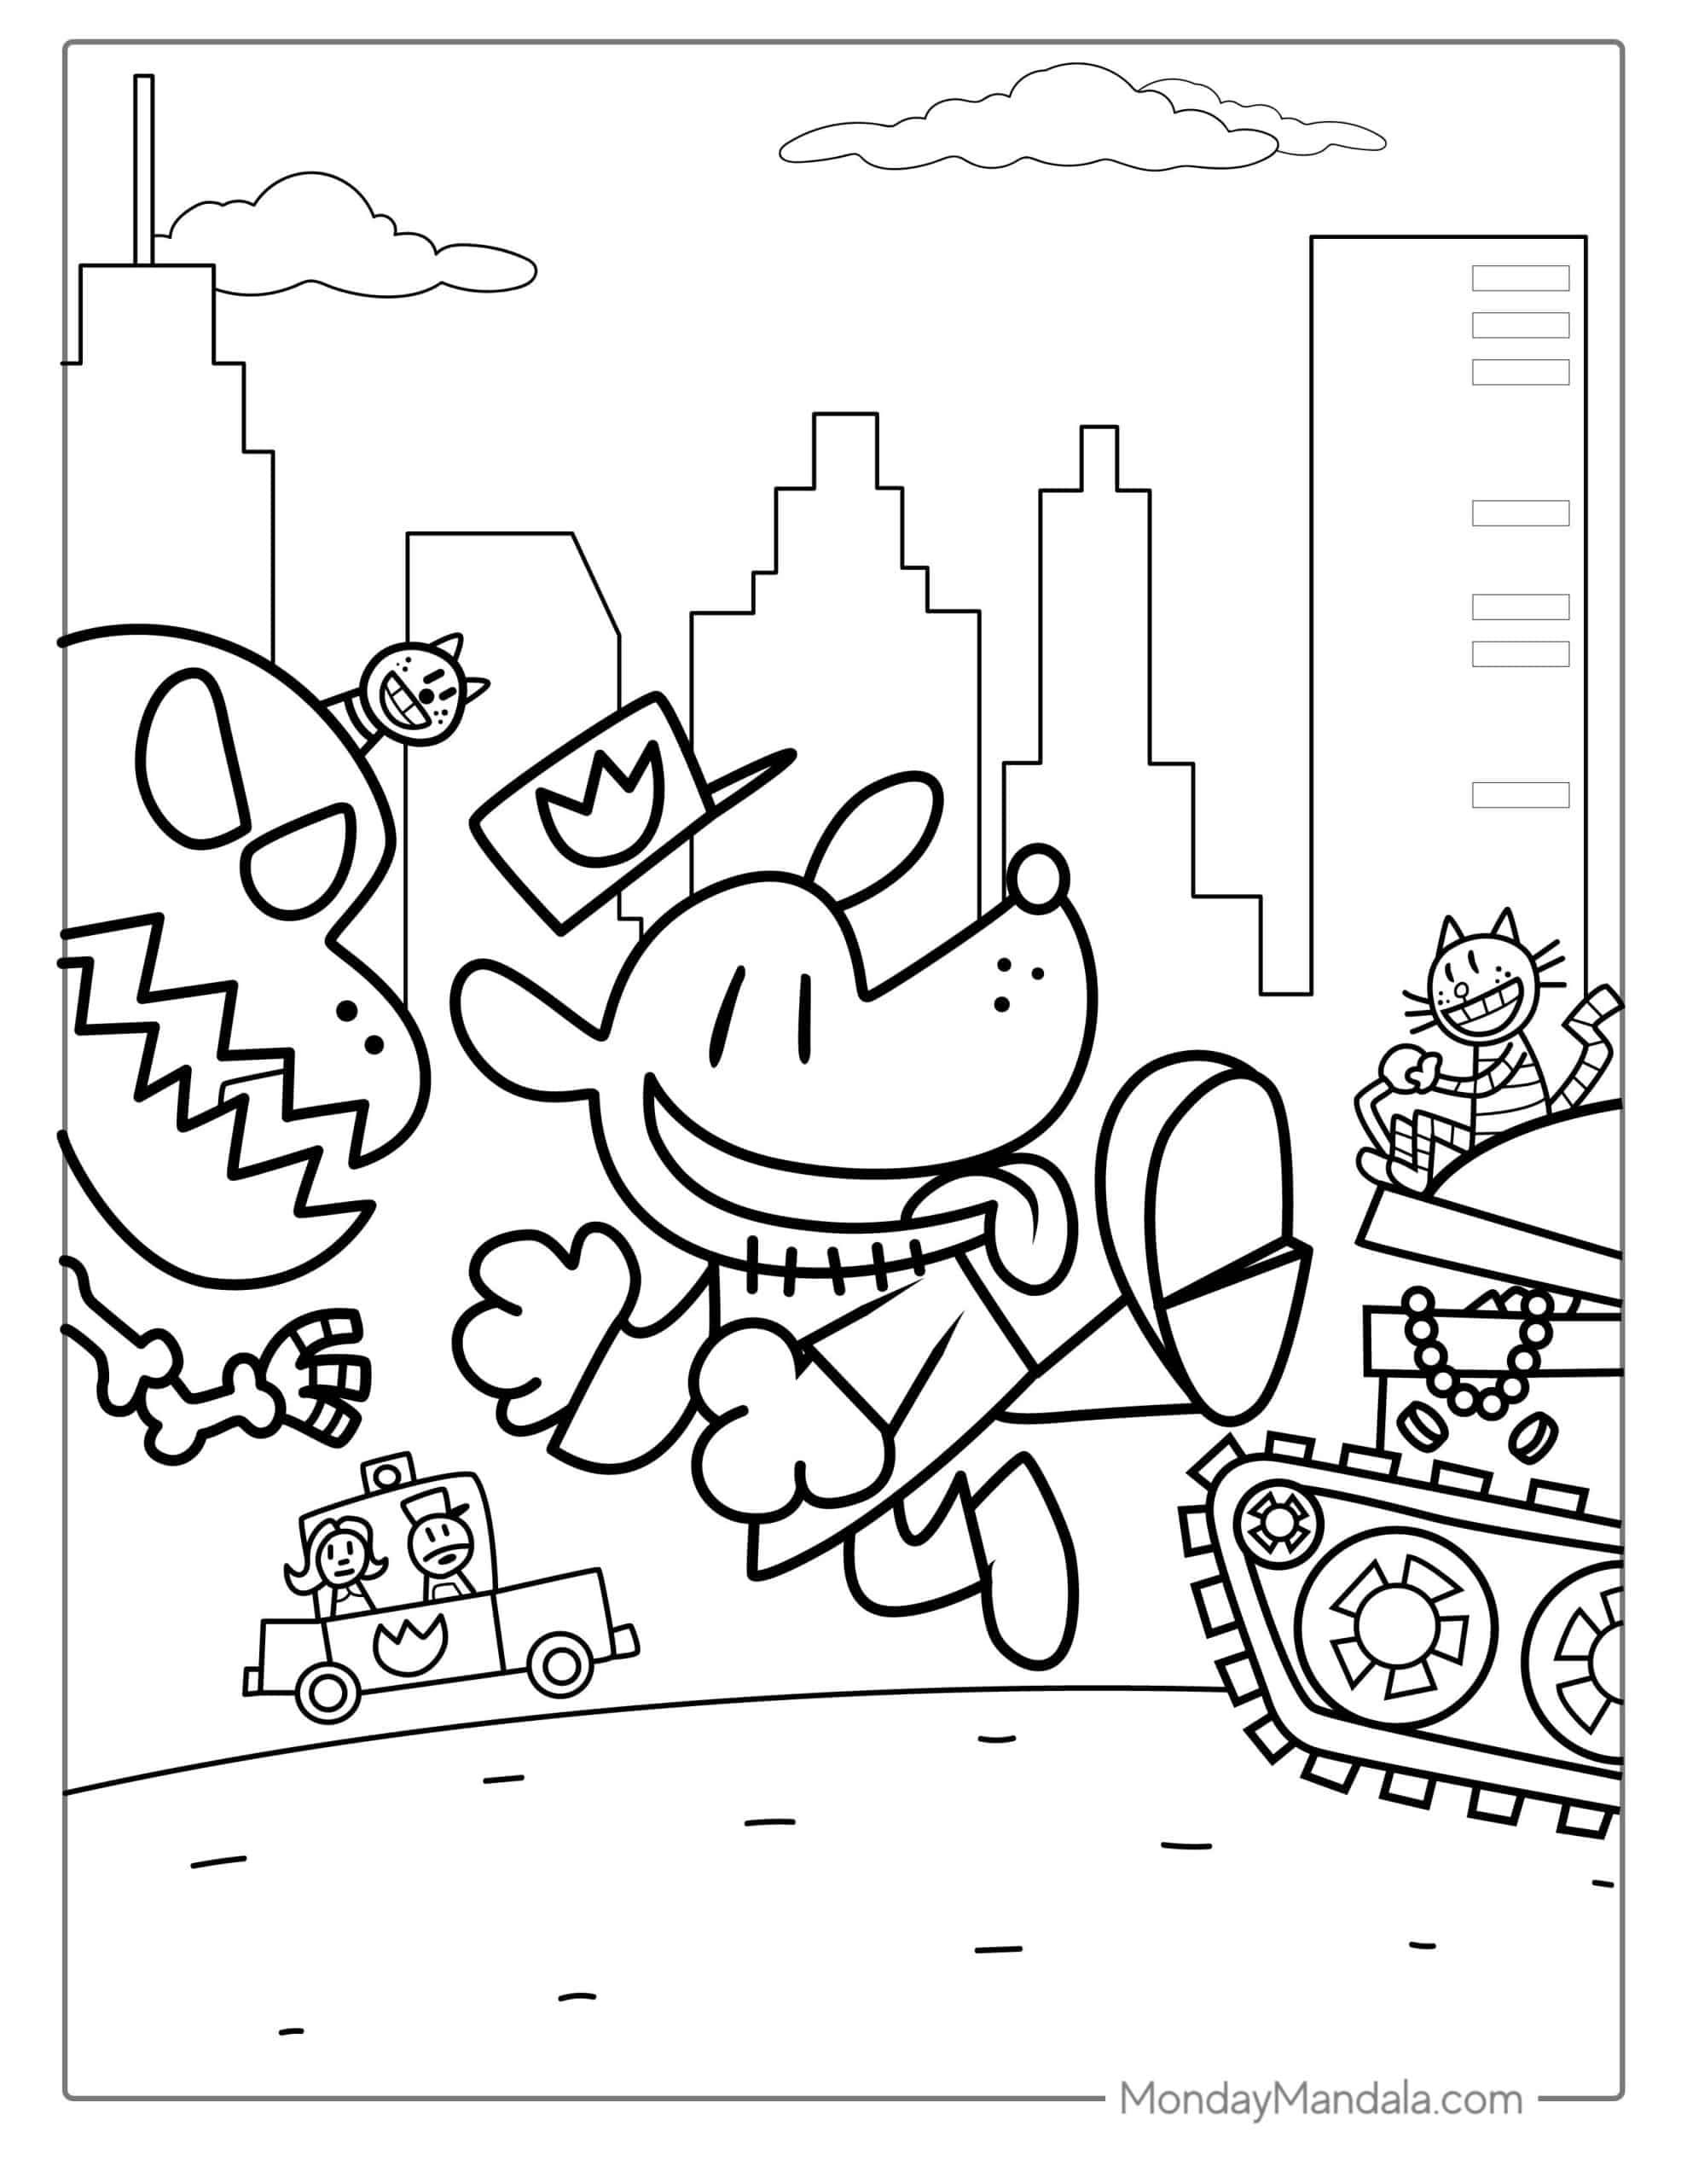 Dog man coloring pages free pdf printables coloring pages snow white coloring pages free printable coloring pages